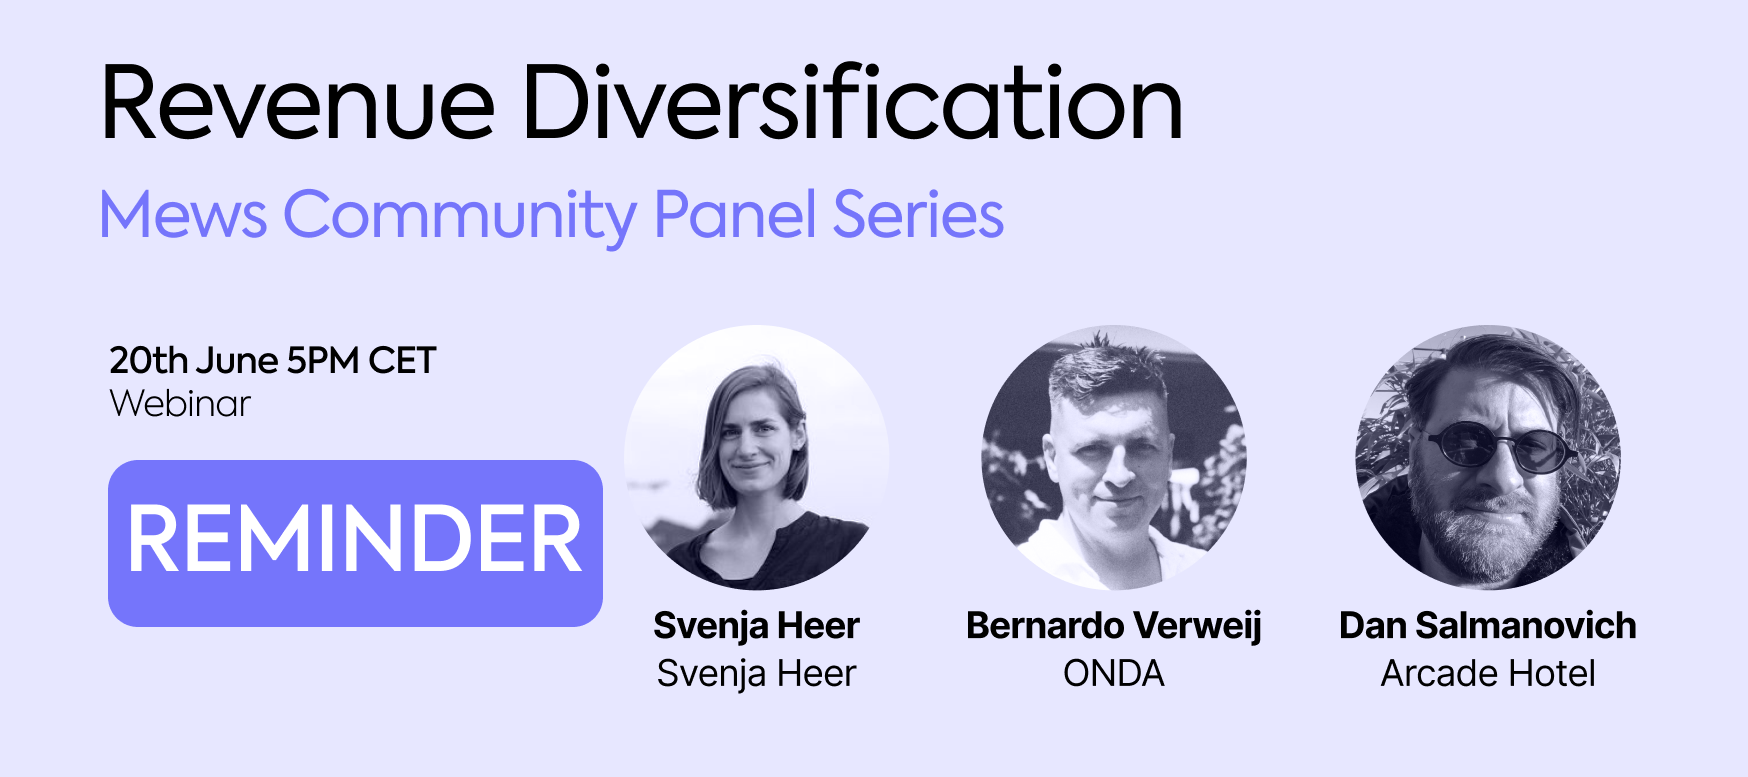 Reminder: Join the Mews Community Panel Series on Revenue Diversification